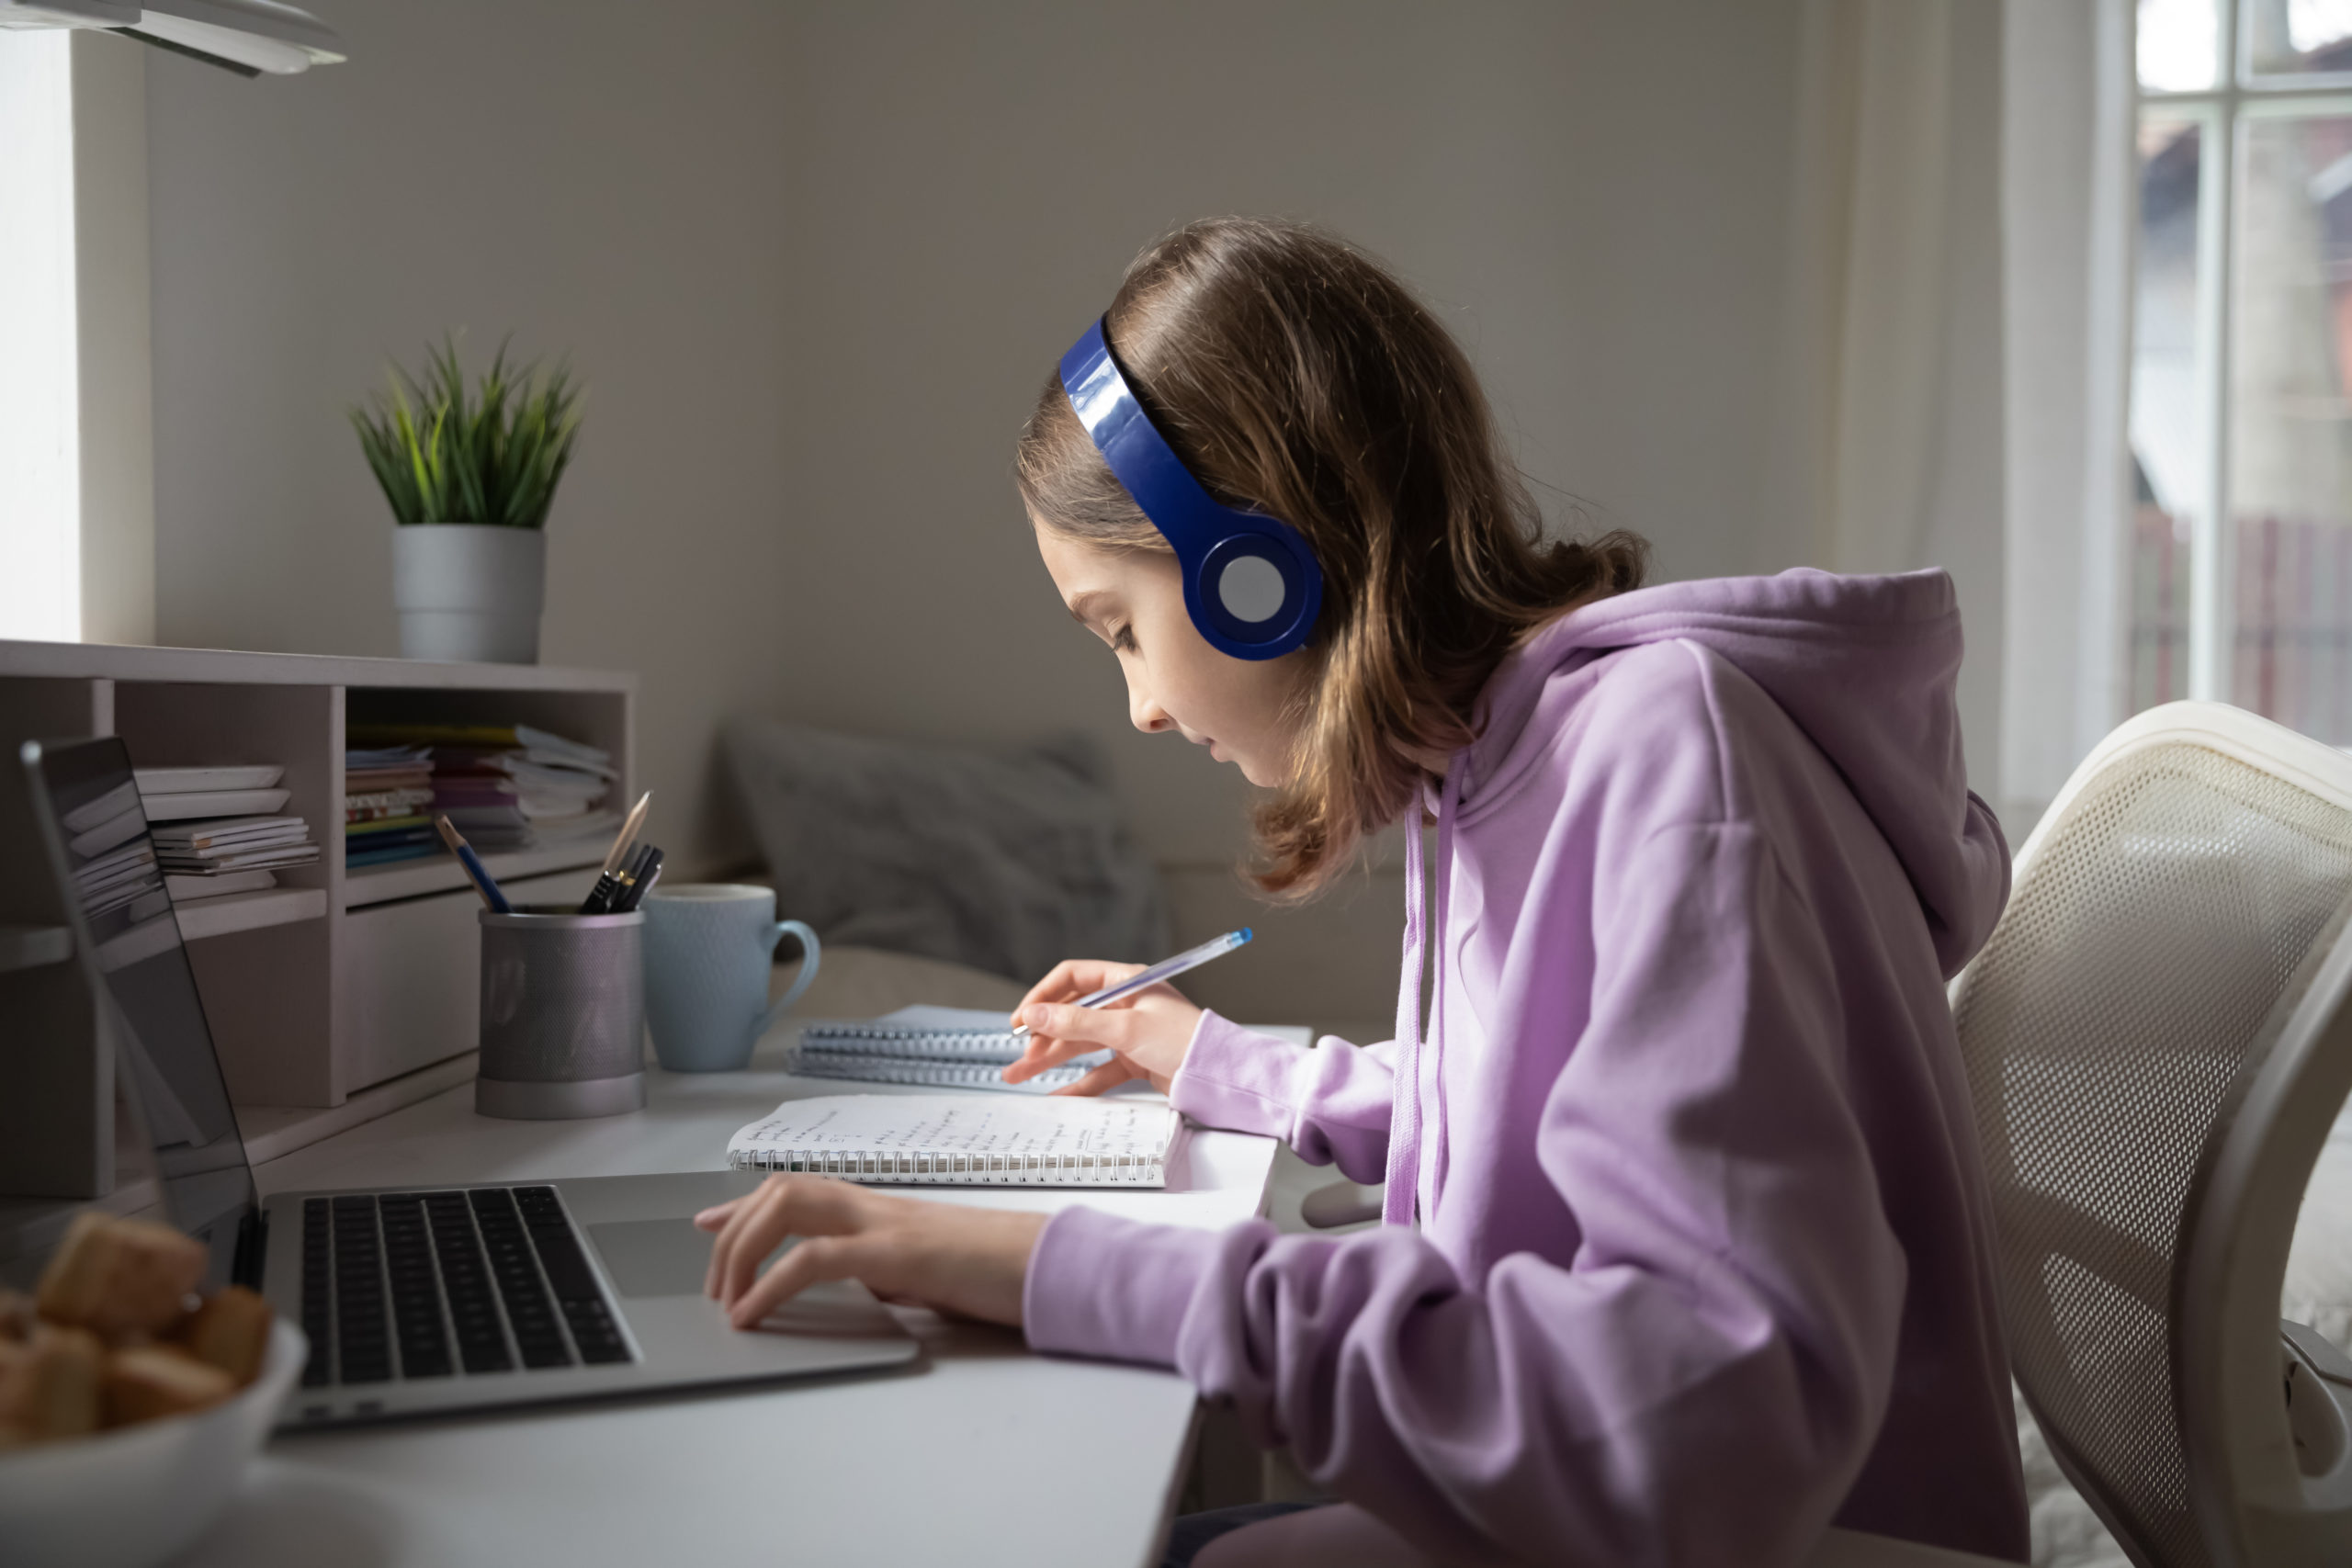 Online learning support and supplemental education help ensure continuous learning when studying from home.